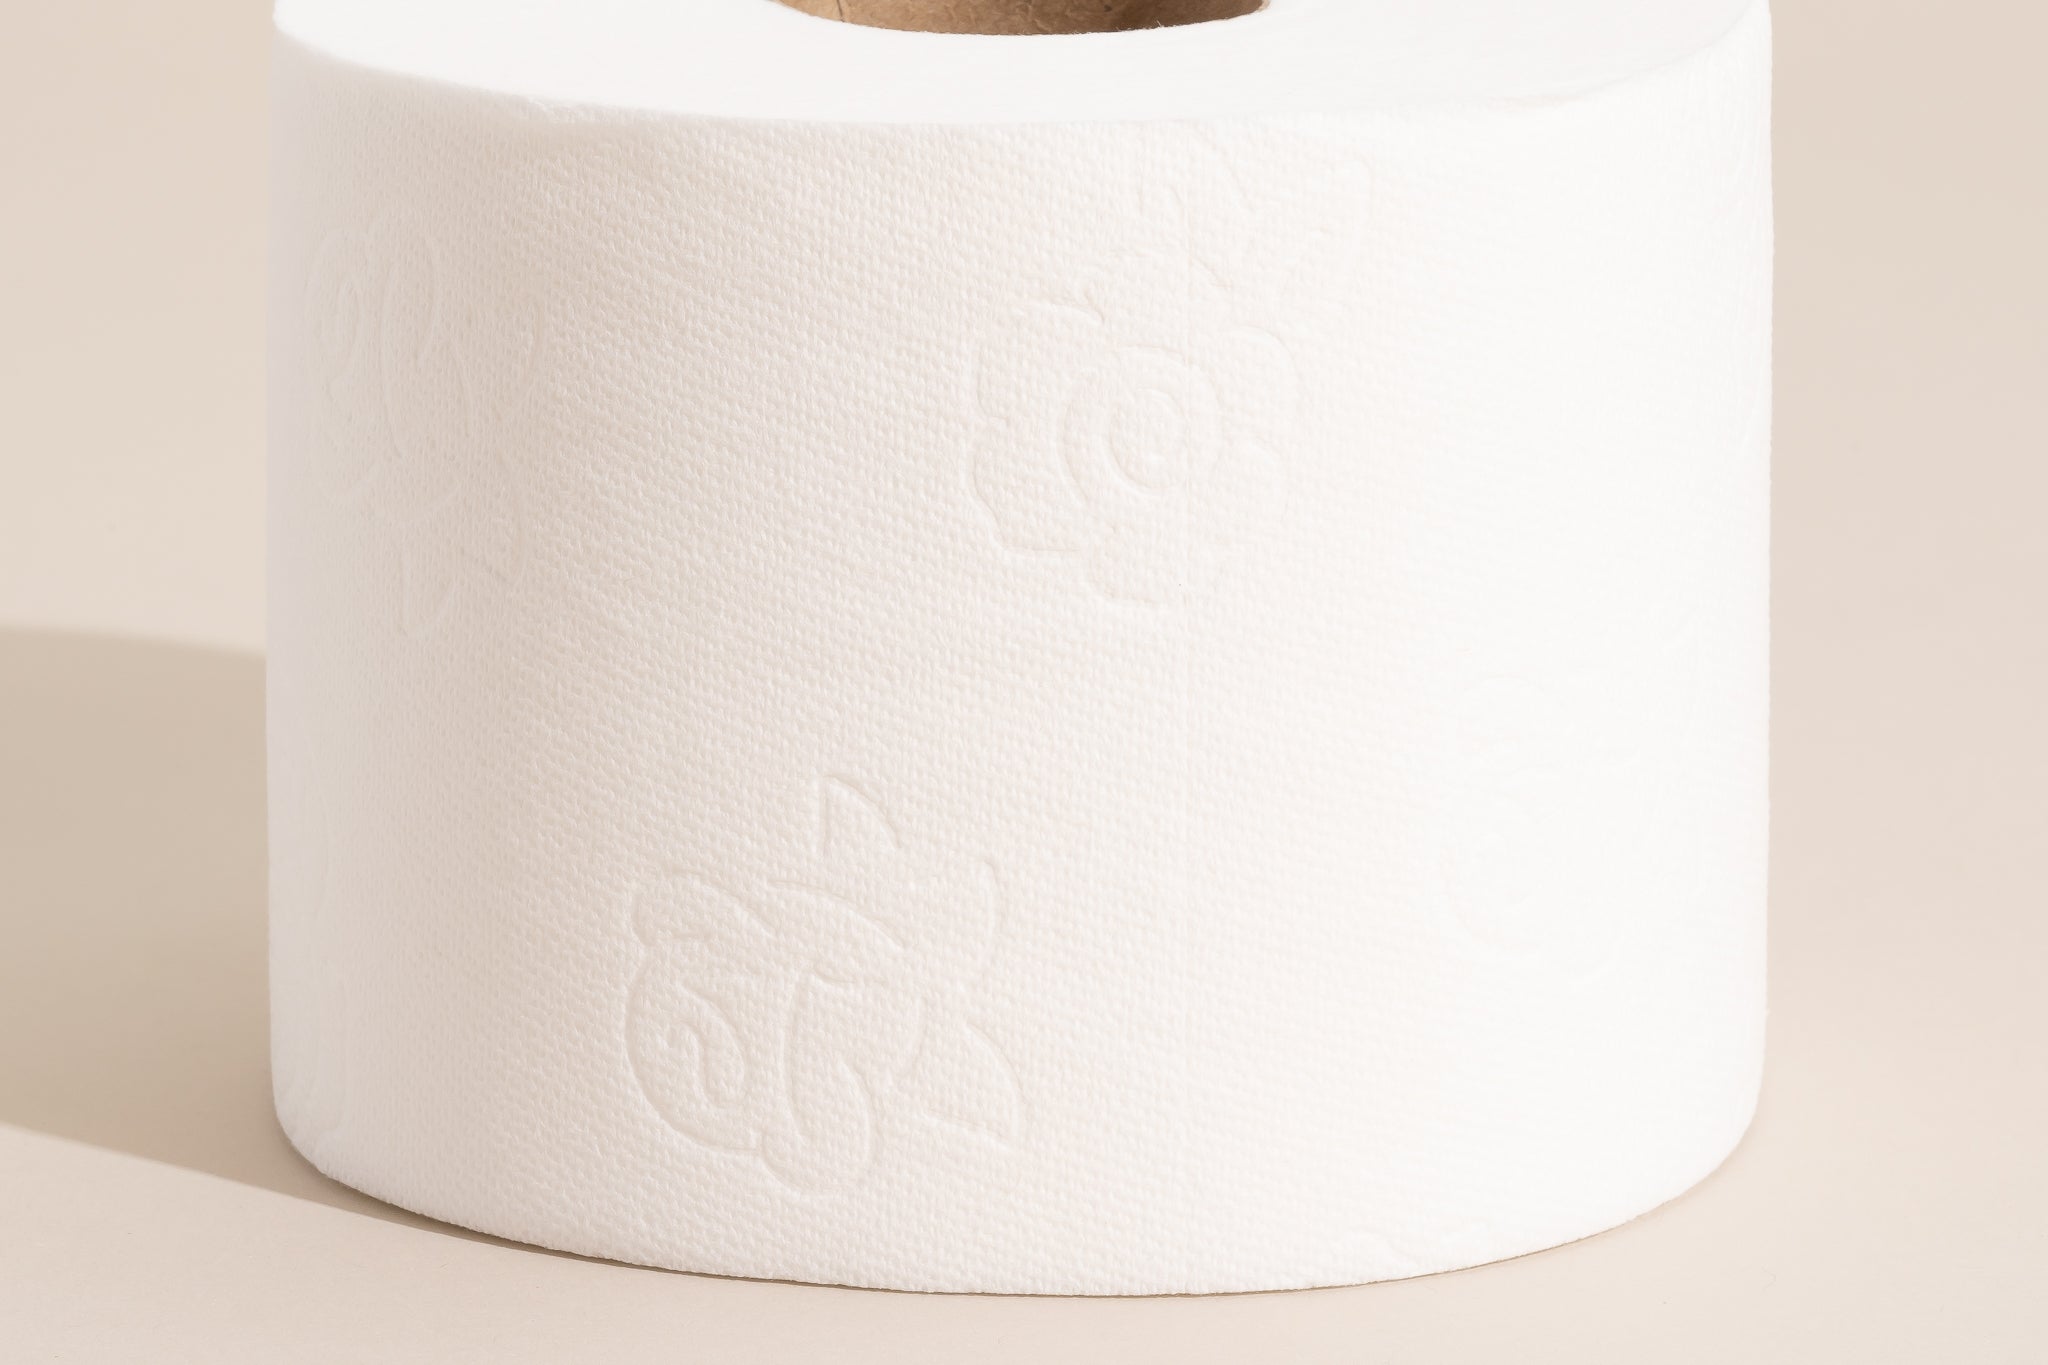 Detail Picture Of A Roll Of Toilet Paper Nomer 40